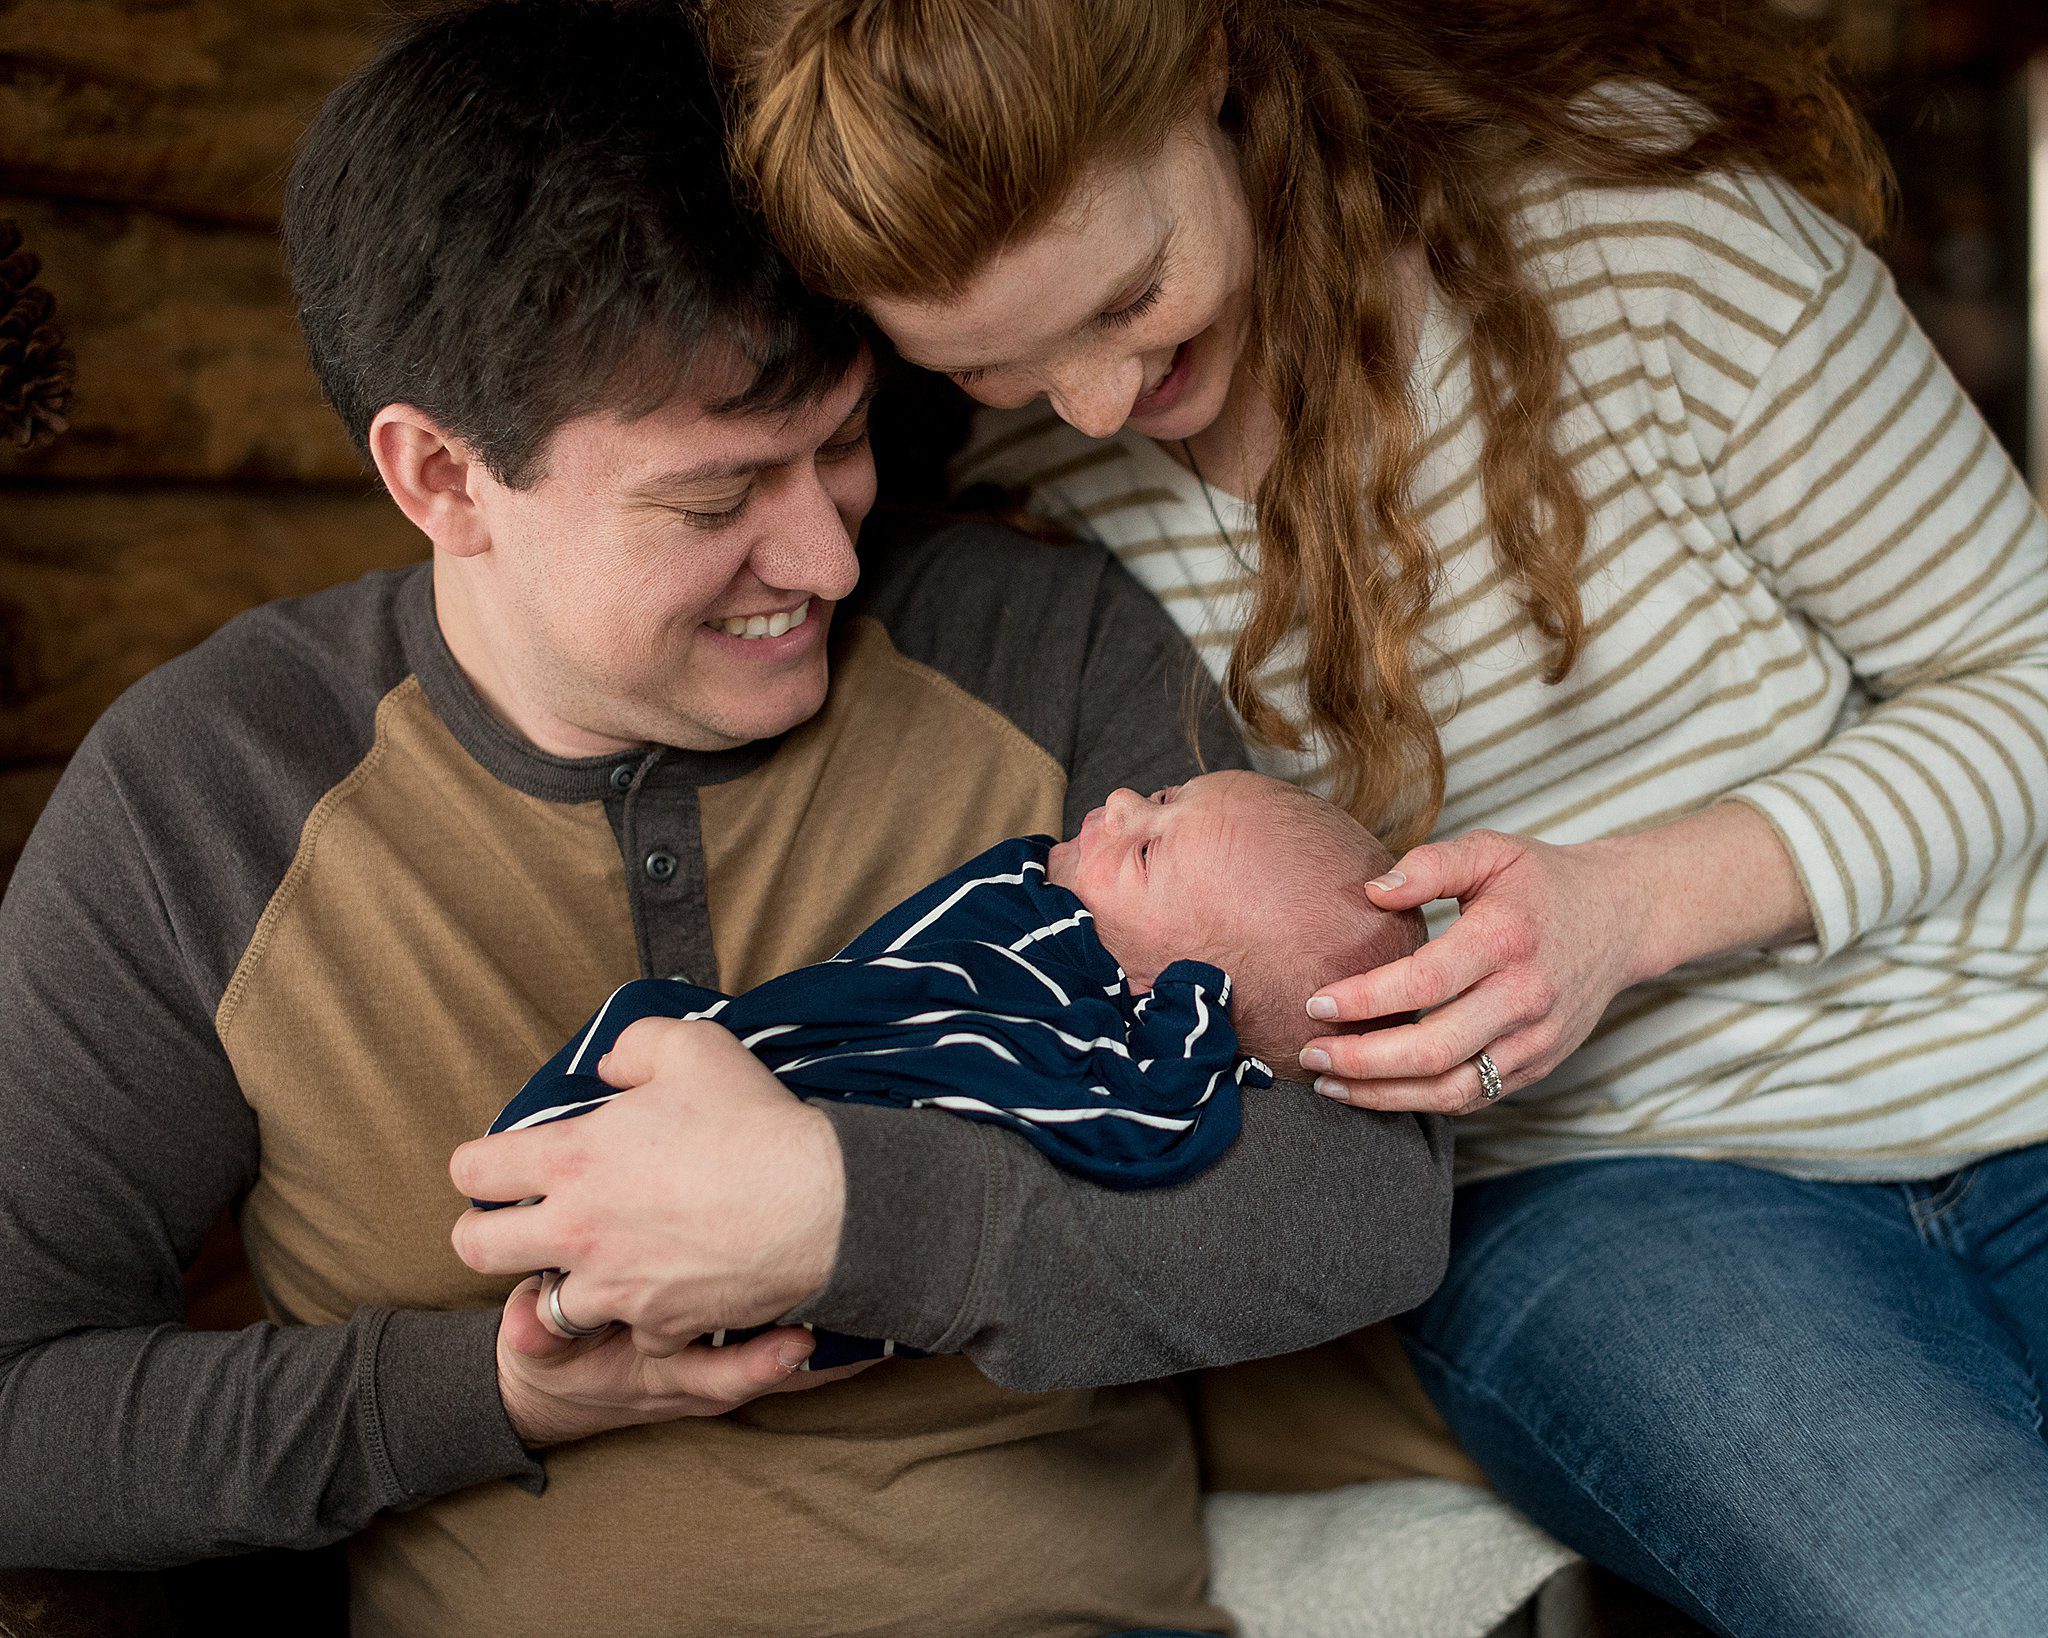 A mom in a stripe shirt leans over her husband cradling their sleeping newborn baby in his arms